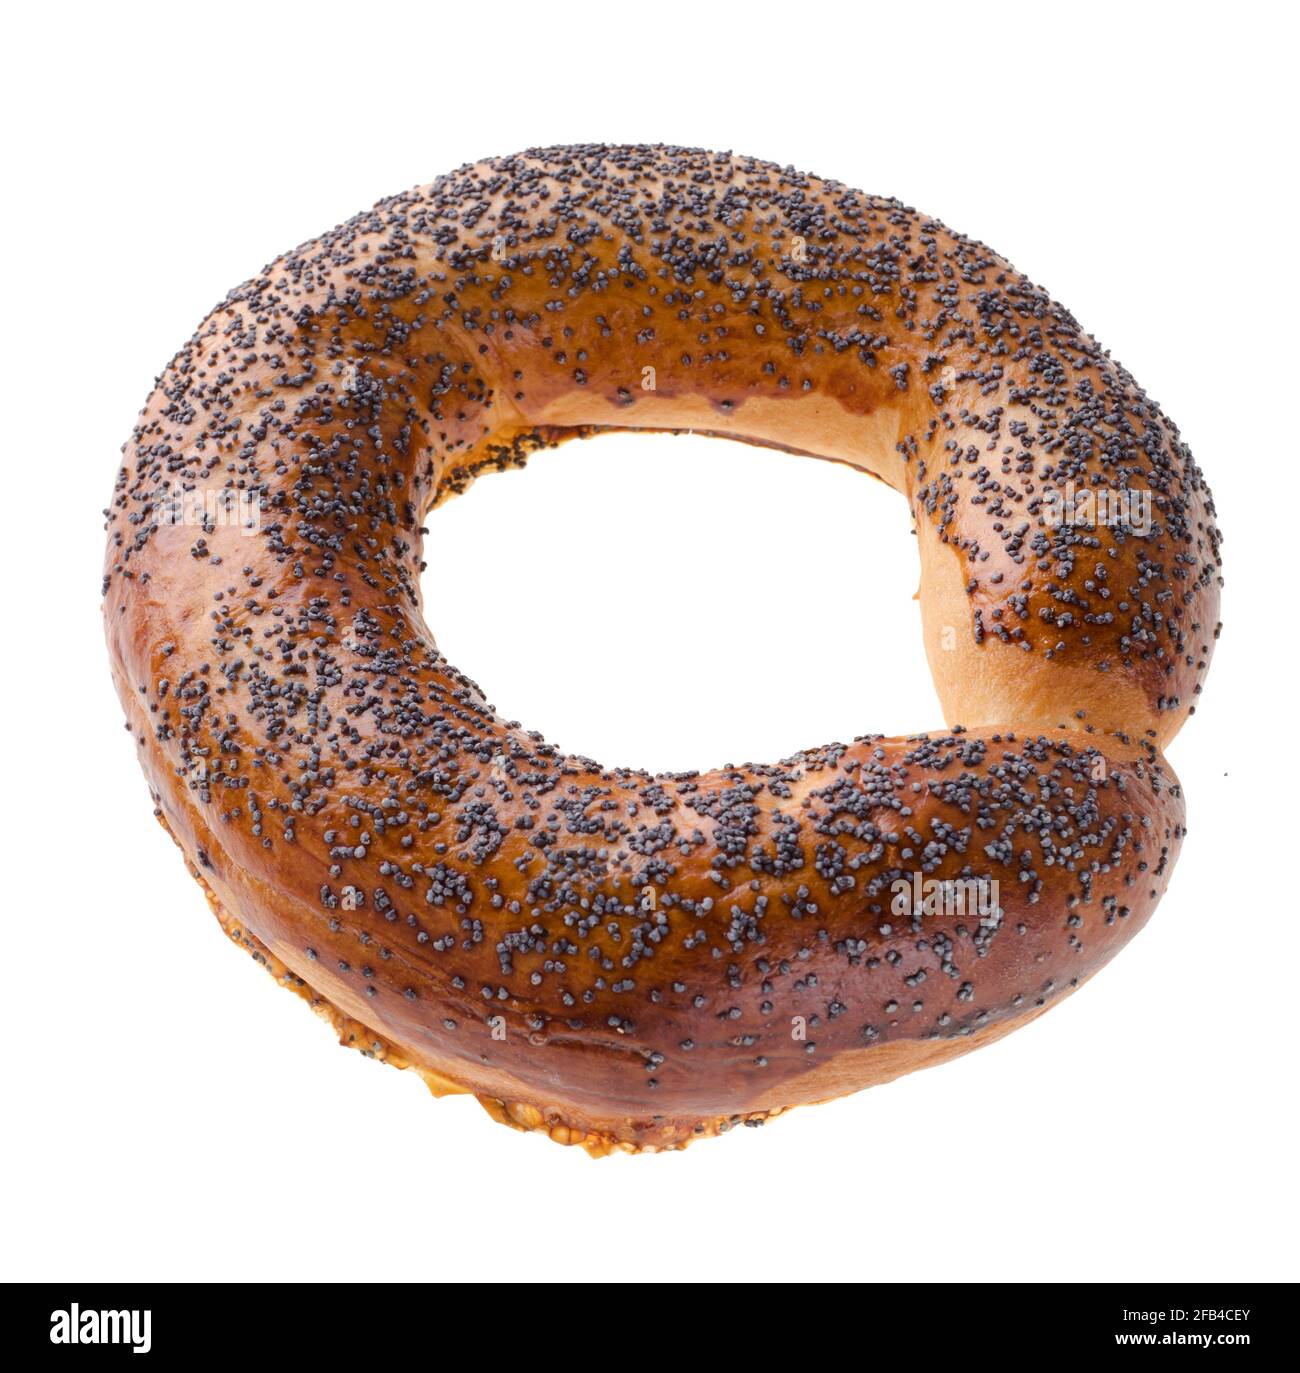 Ruddy bagel with top sprinkled with poppy seeds, on a white background in isolation Stock Photo